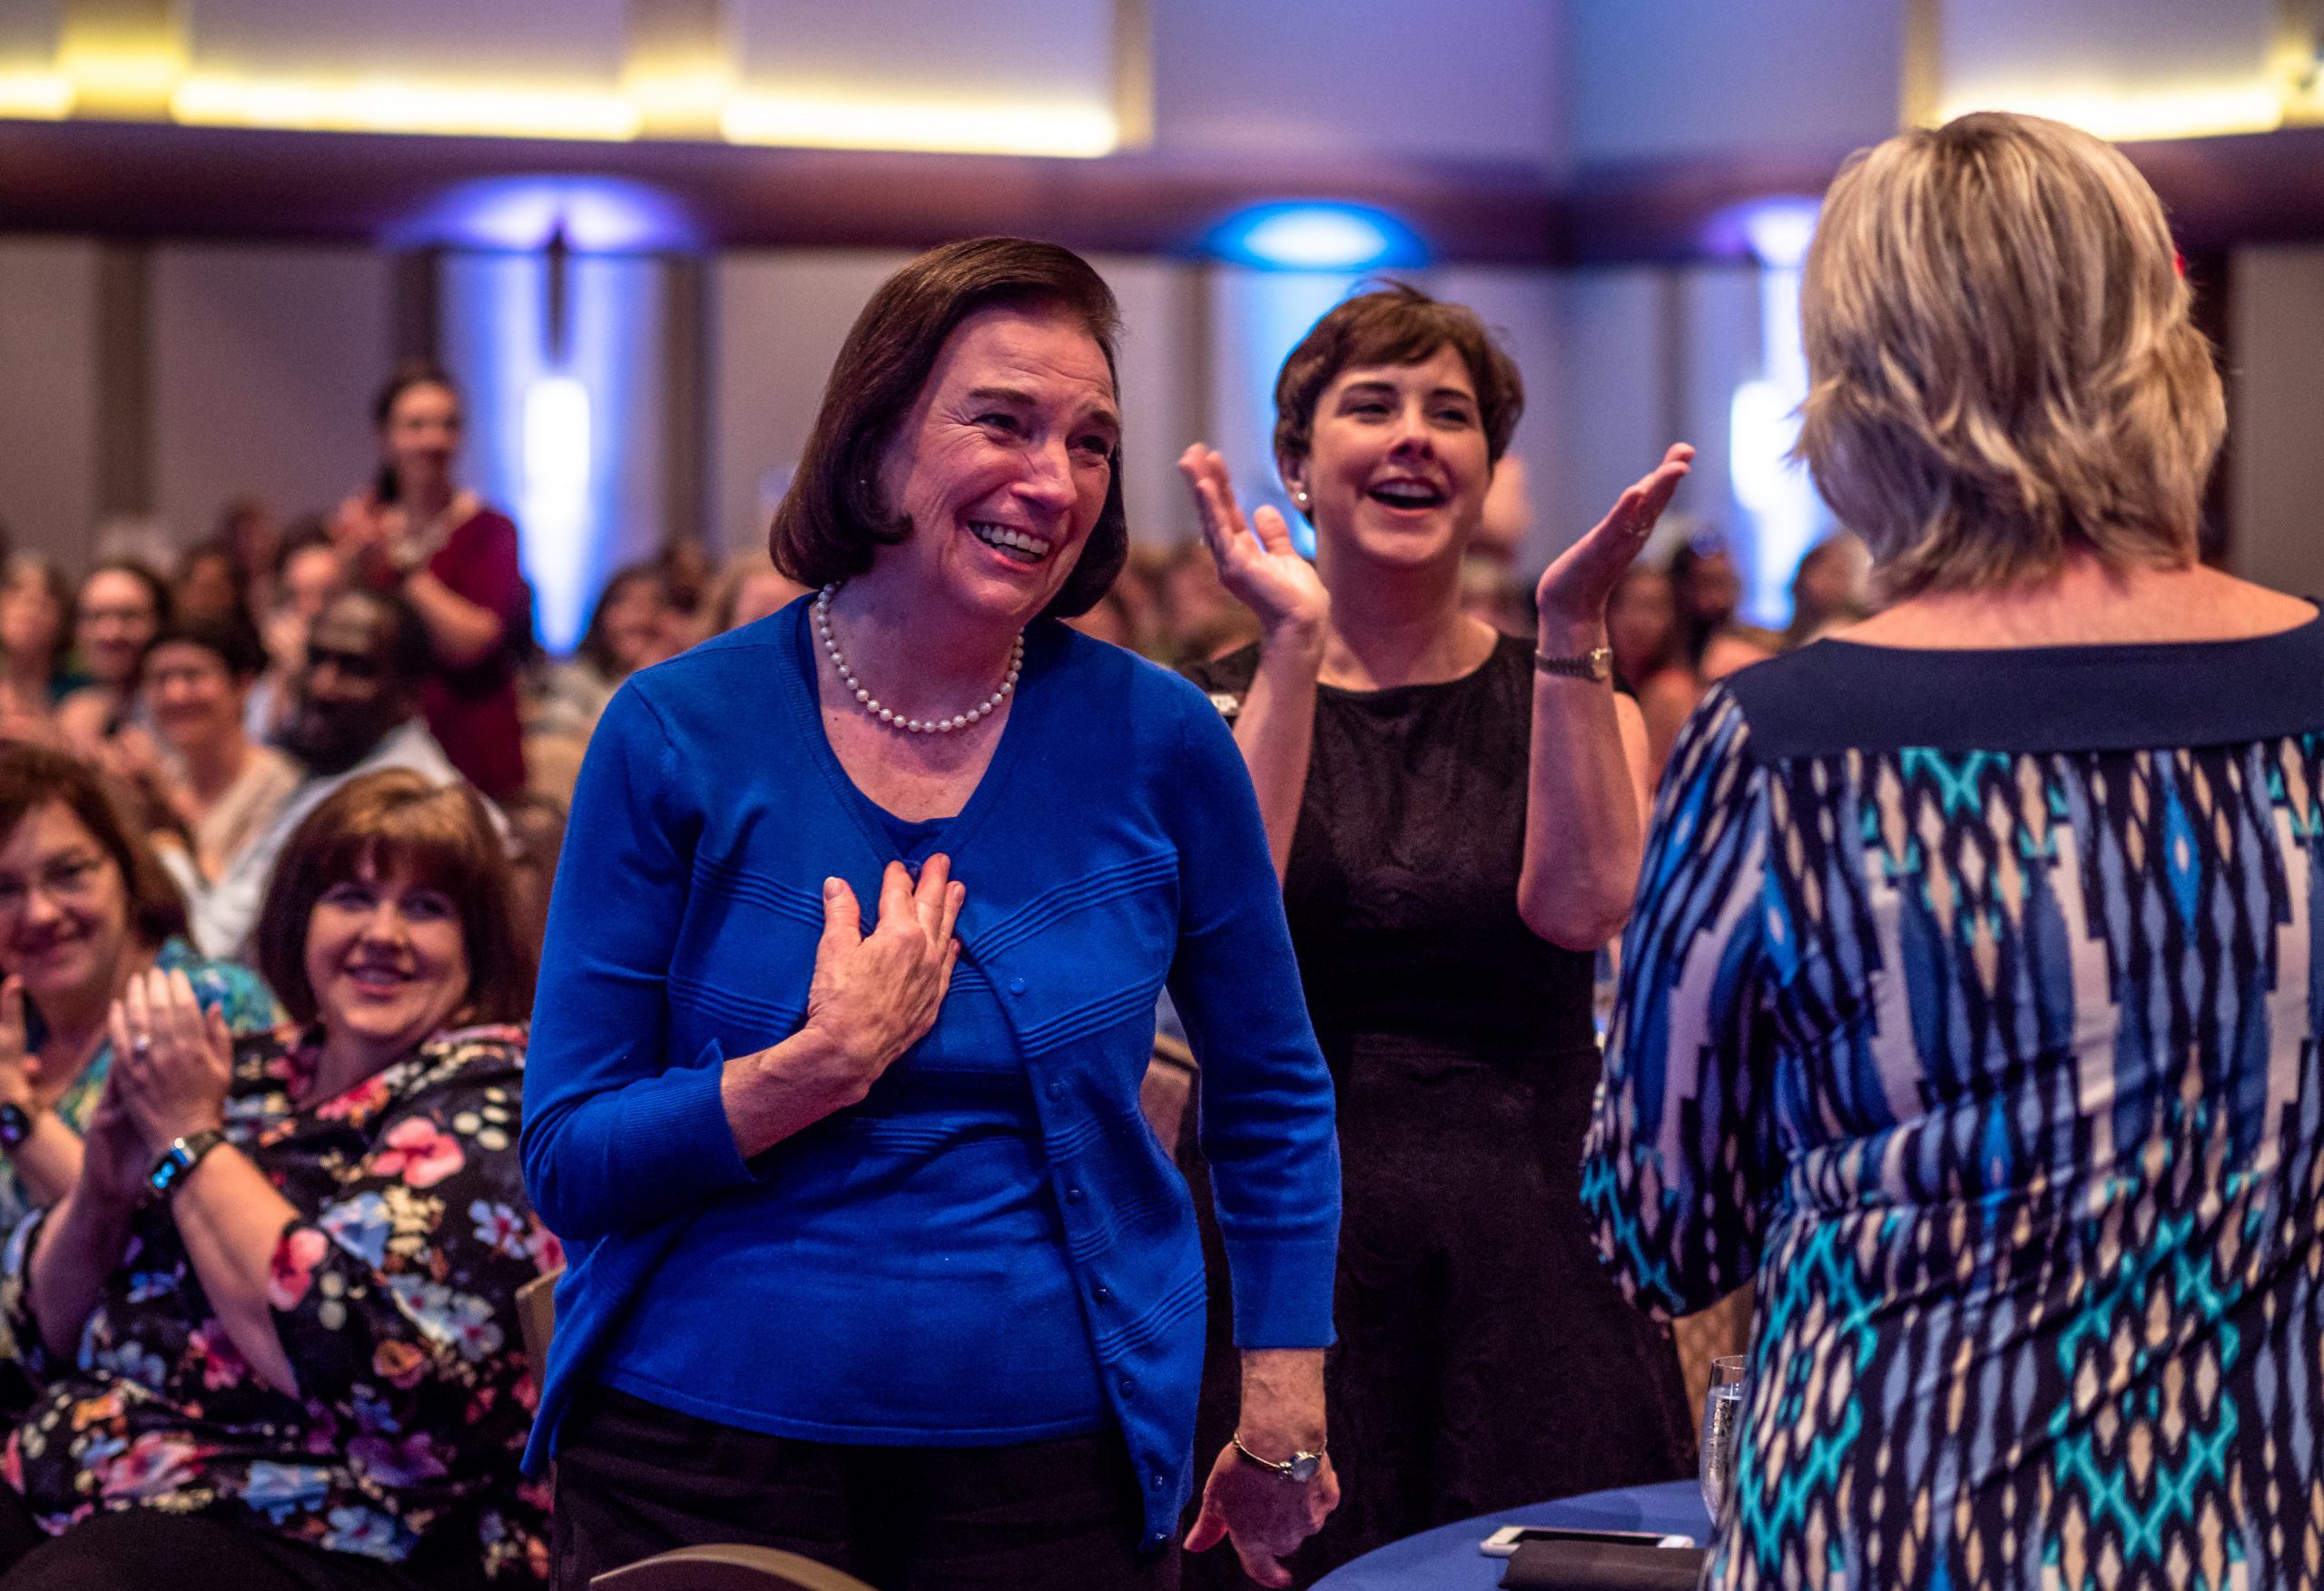 Woman smiling in crowd at the DSA awards event